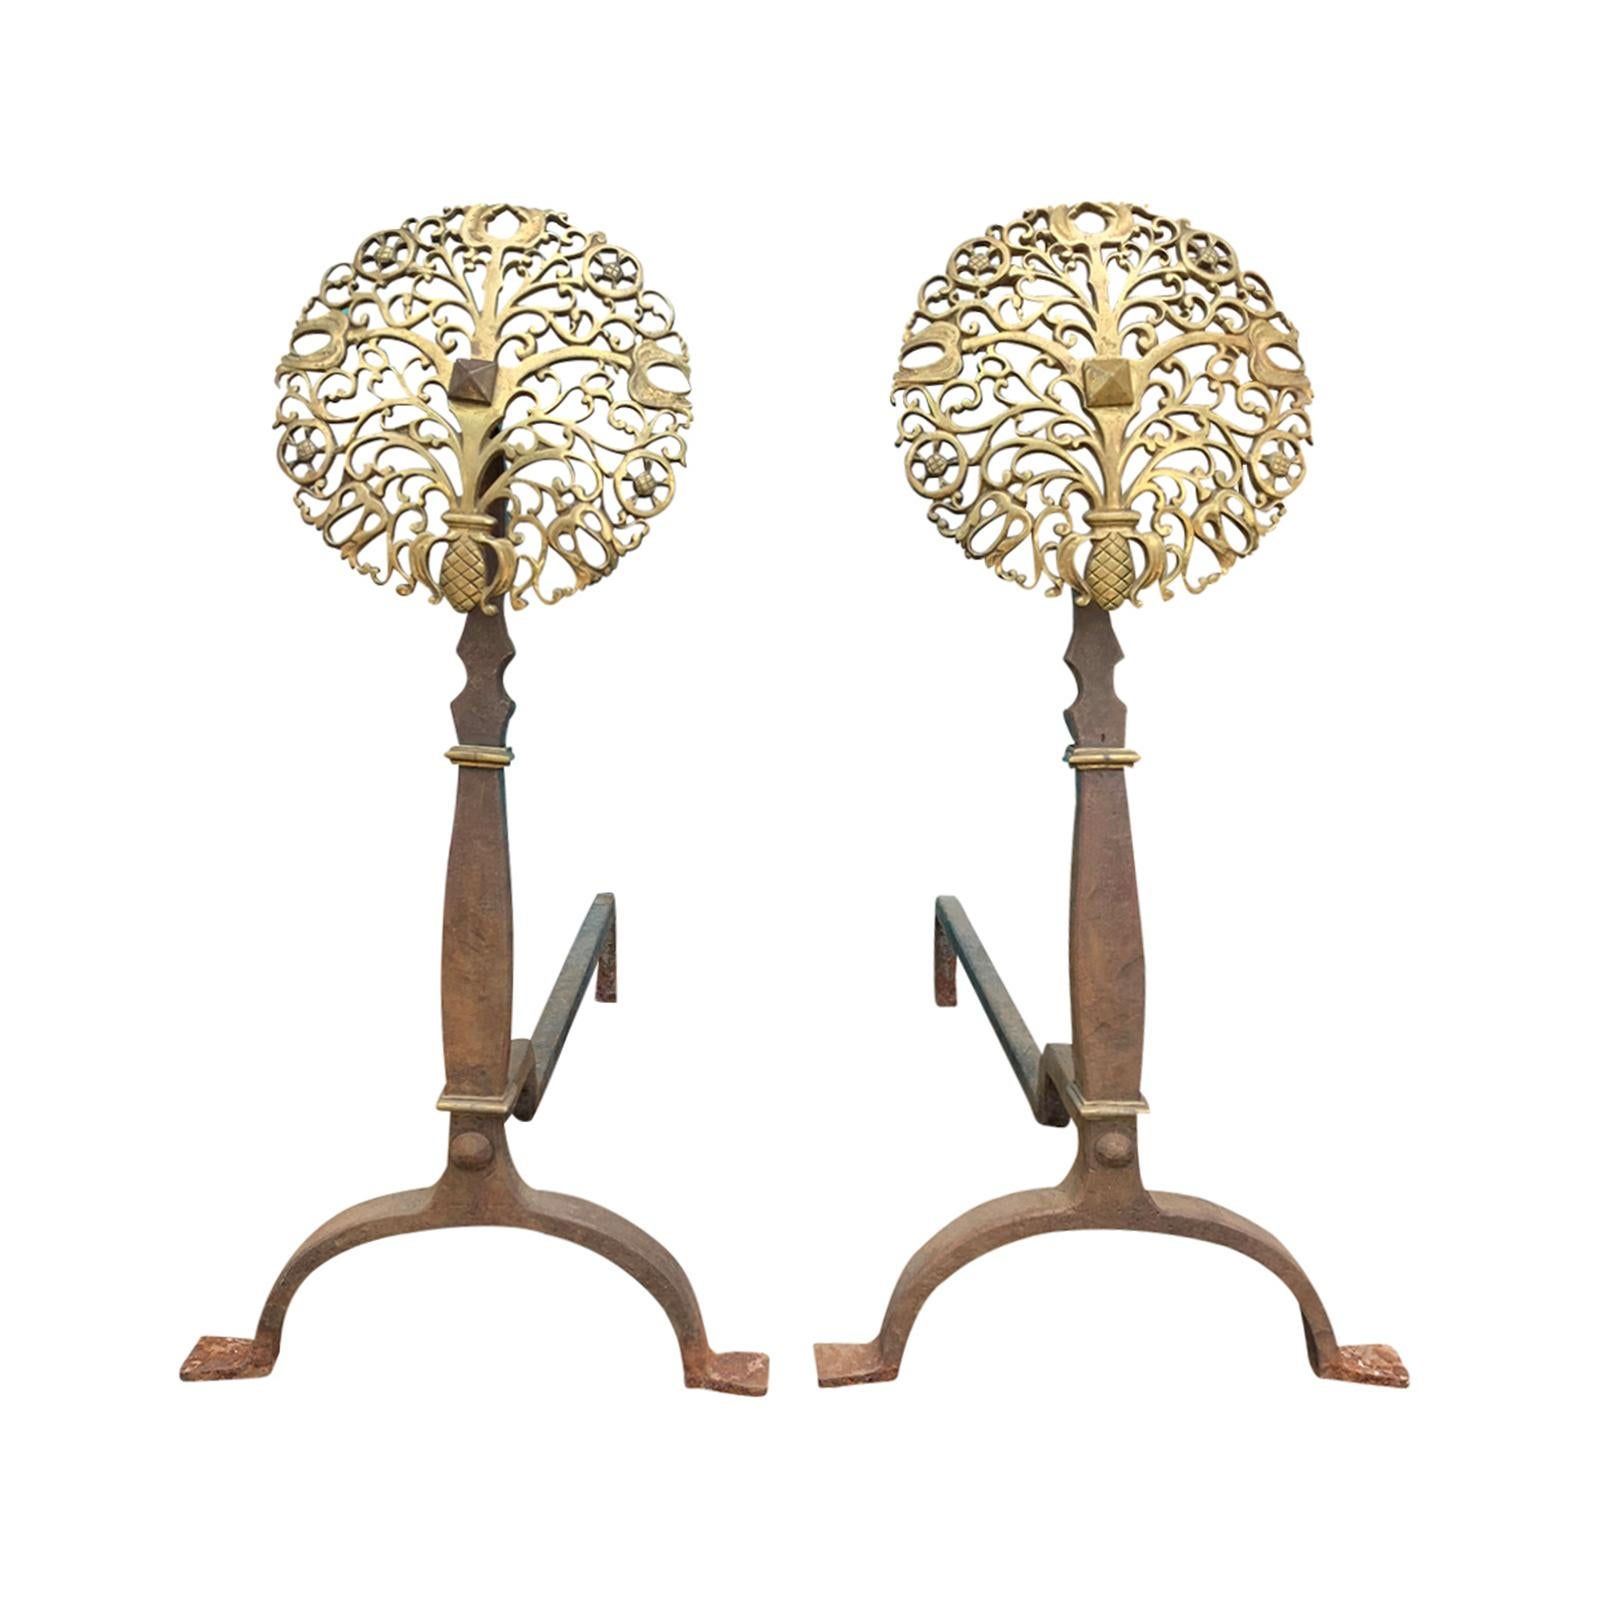 Pair of Early 20th Century Brass and Steel Medallion Andirons, circa 1900